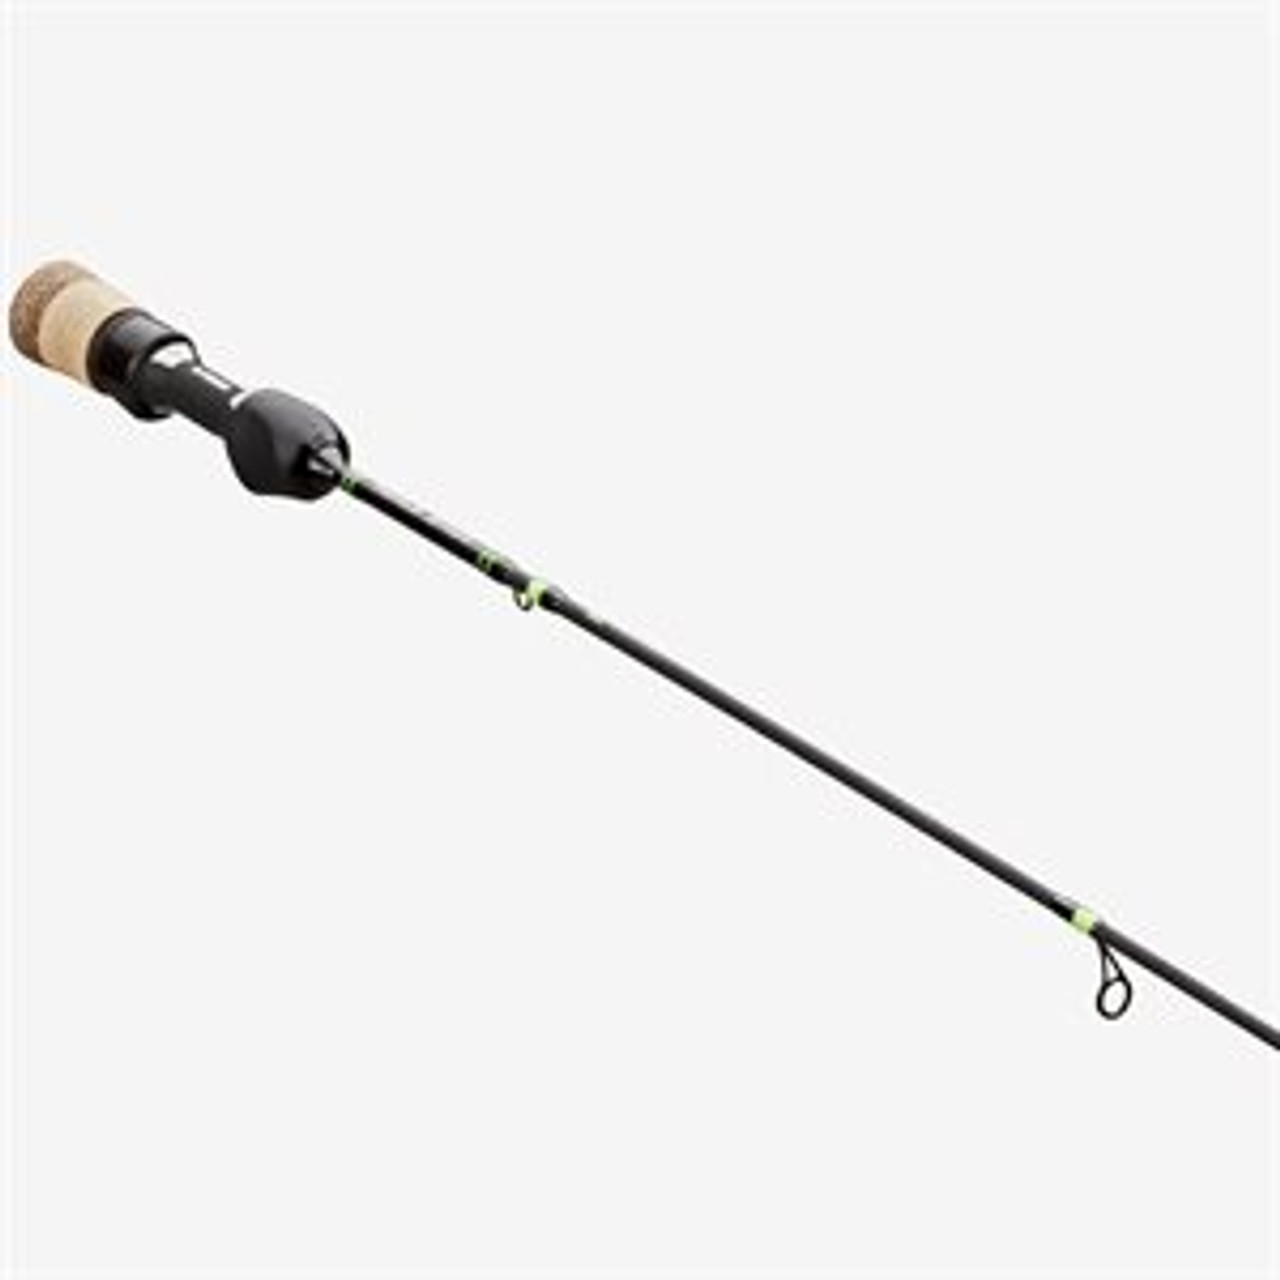 13 Fishing Tickle Stick Ice Rod 28" MH